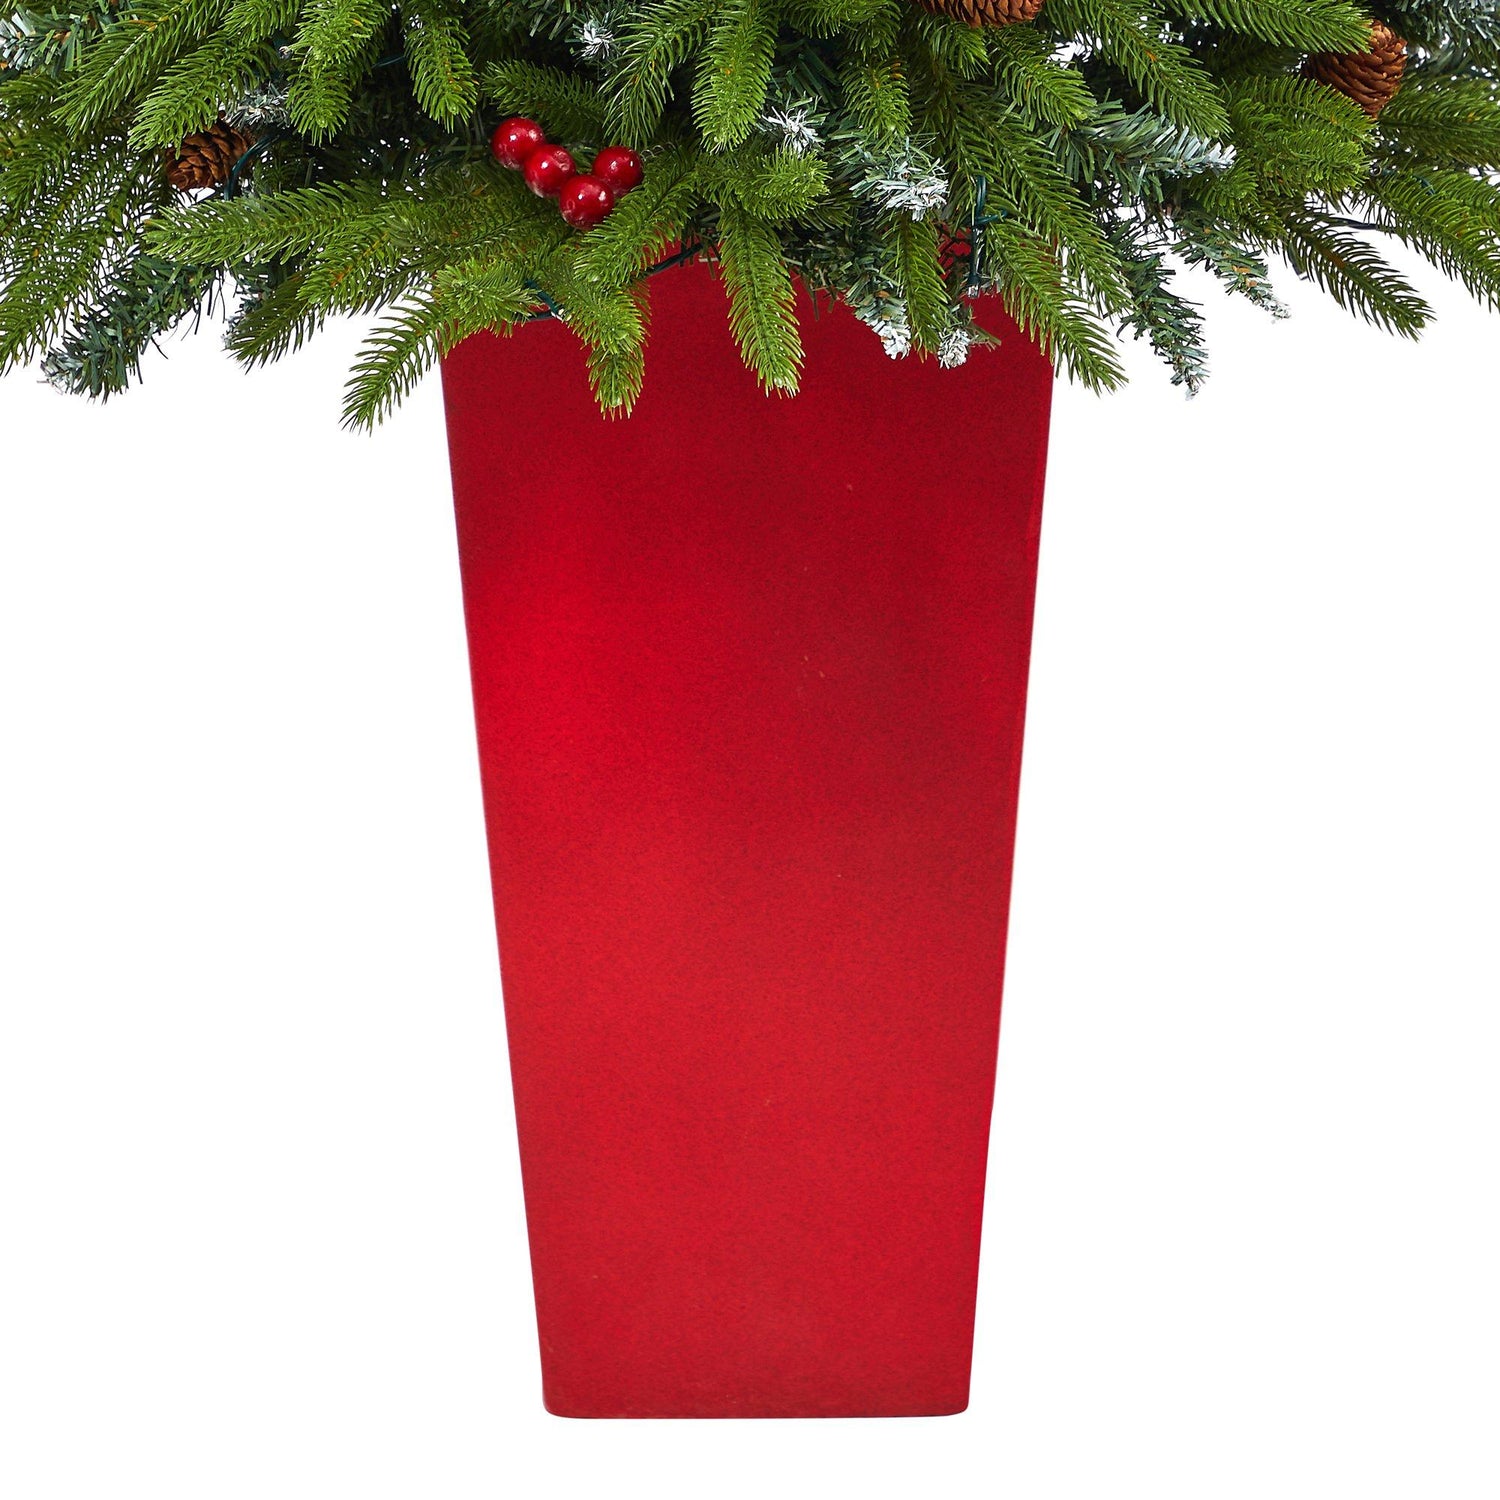 62” Snow Tipped Portland Spruce Artificial Christmas Tree with Frosted Berries and Pinecones with 100 Clear LED Lights in Red Tower Planter